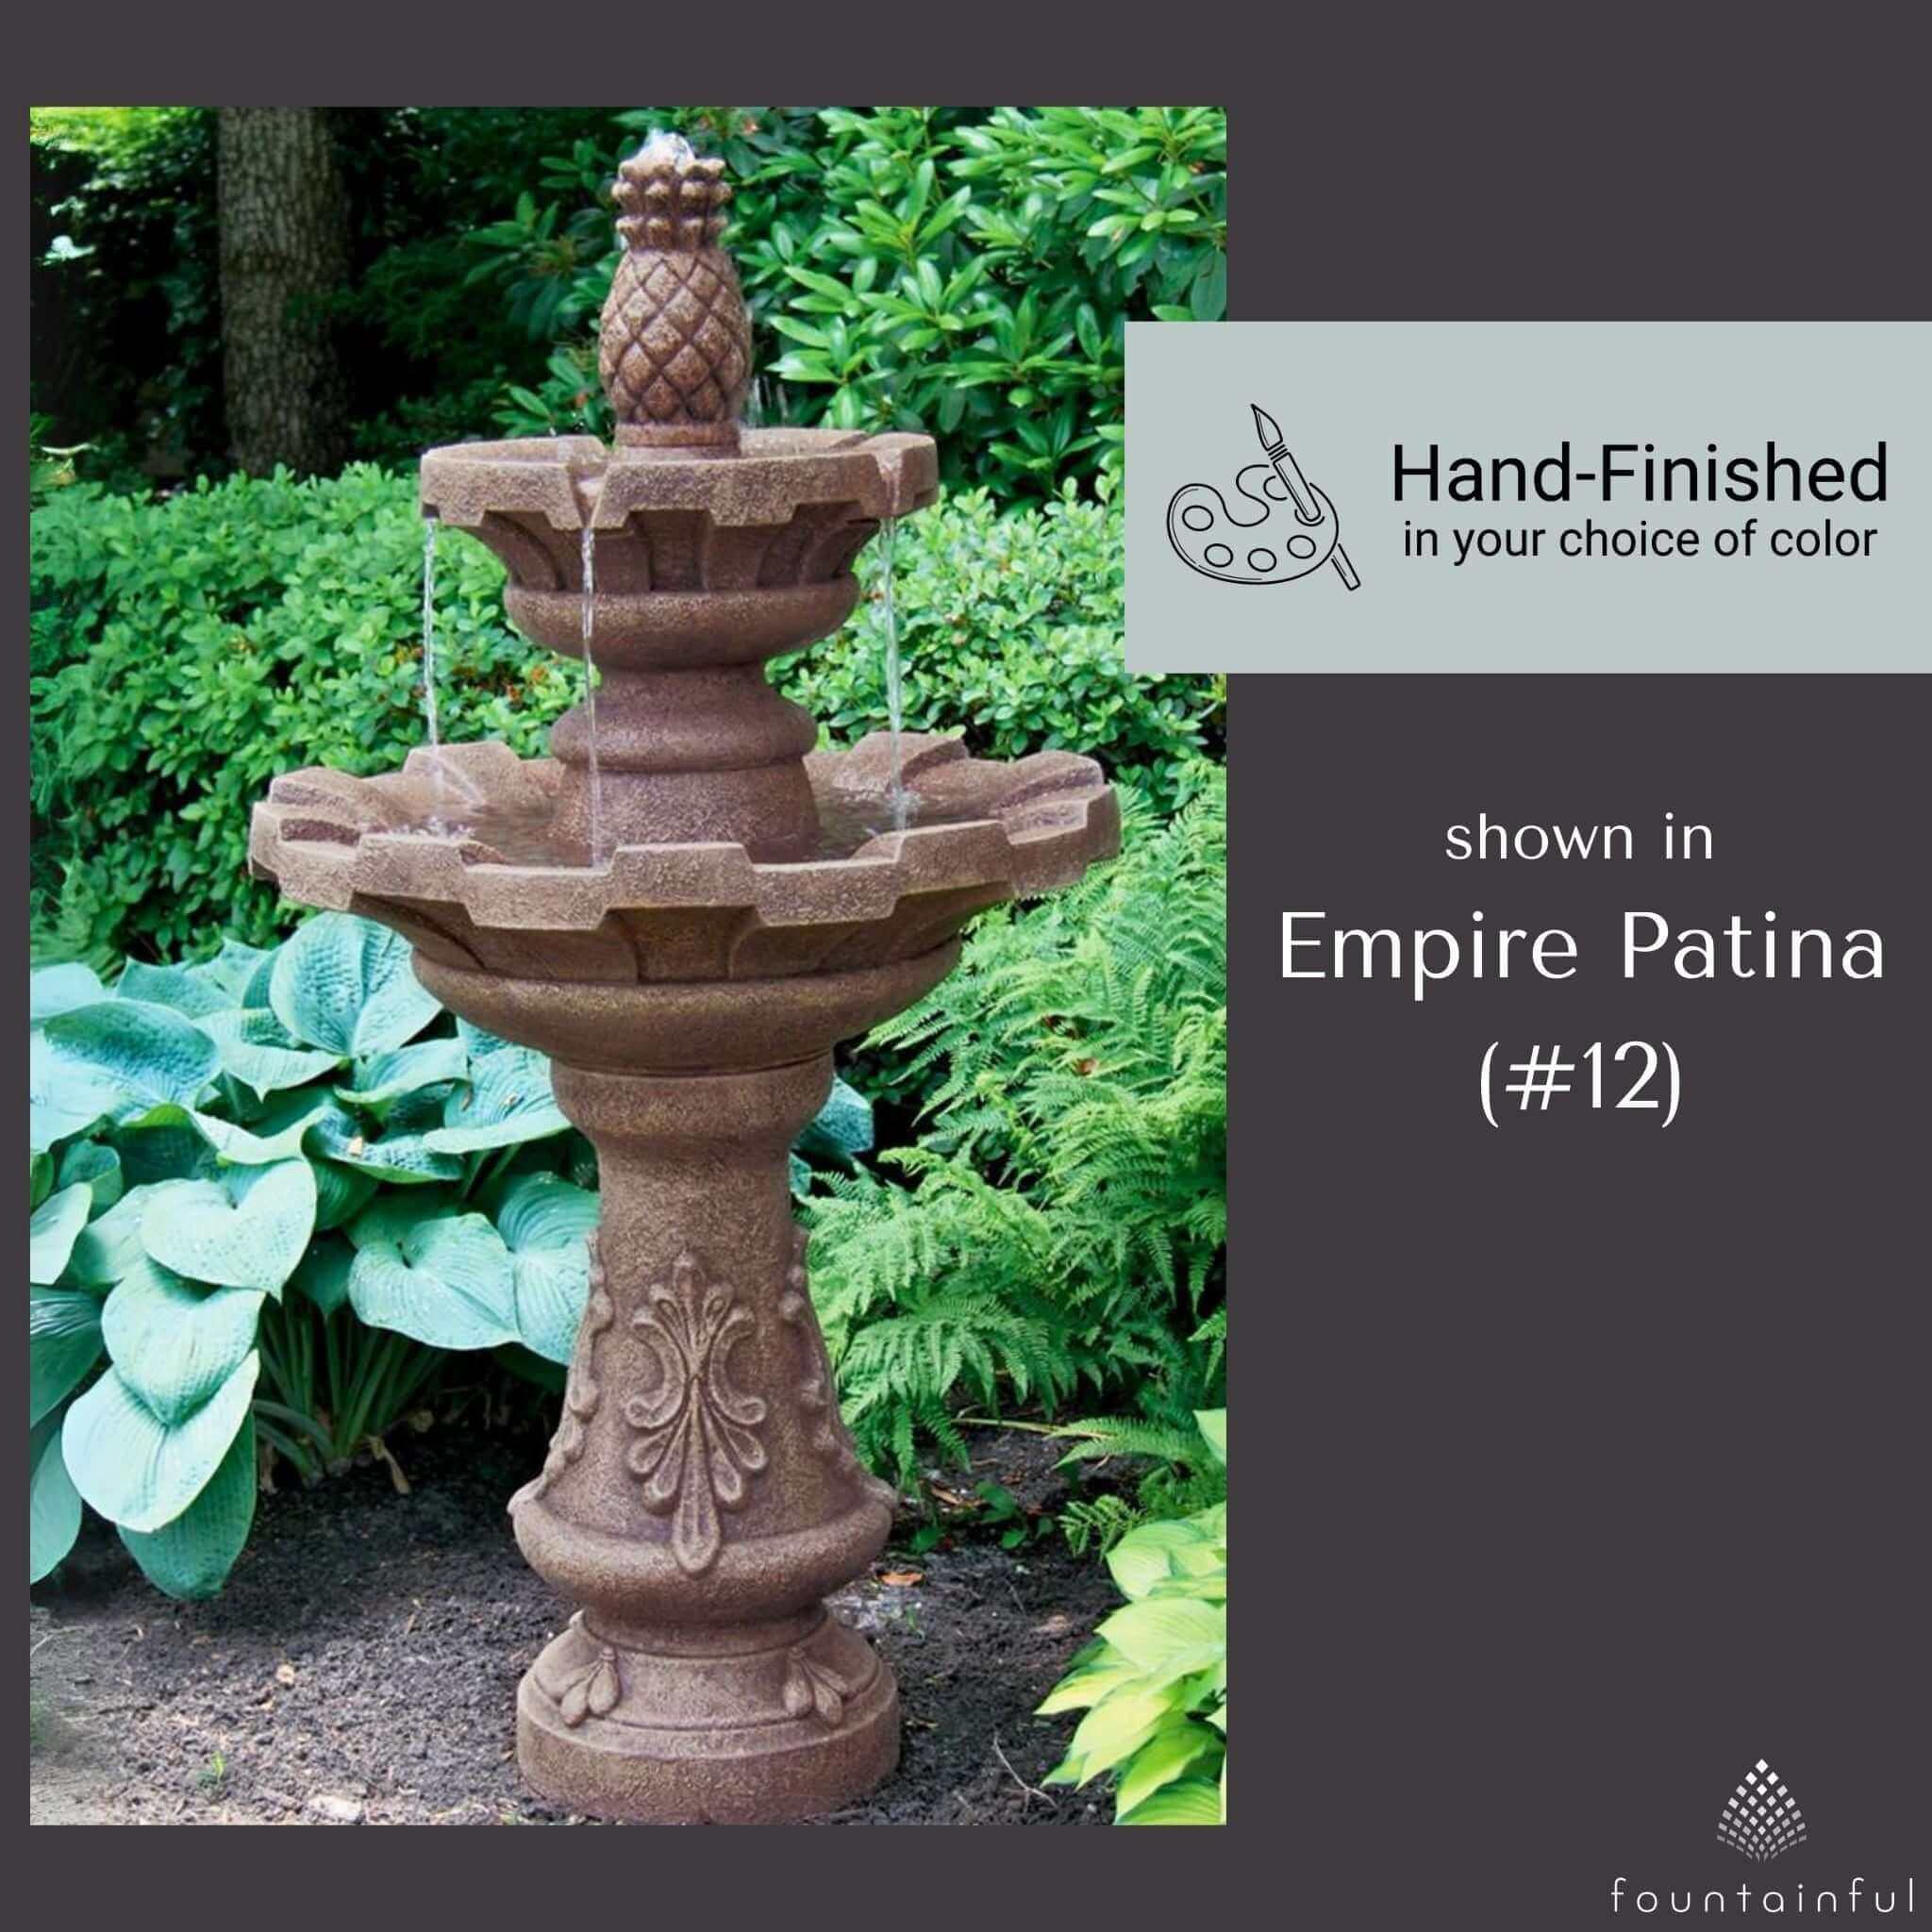 Fluted 2-Tier Concrete Fountain with Pineapple Finial - Massarellis #3850